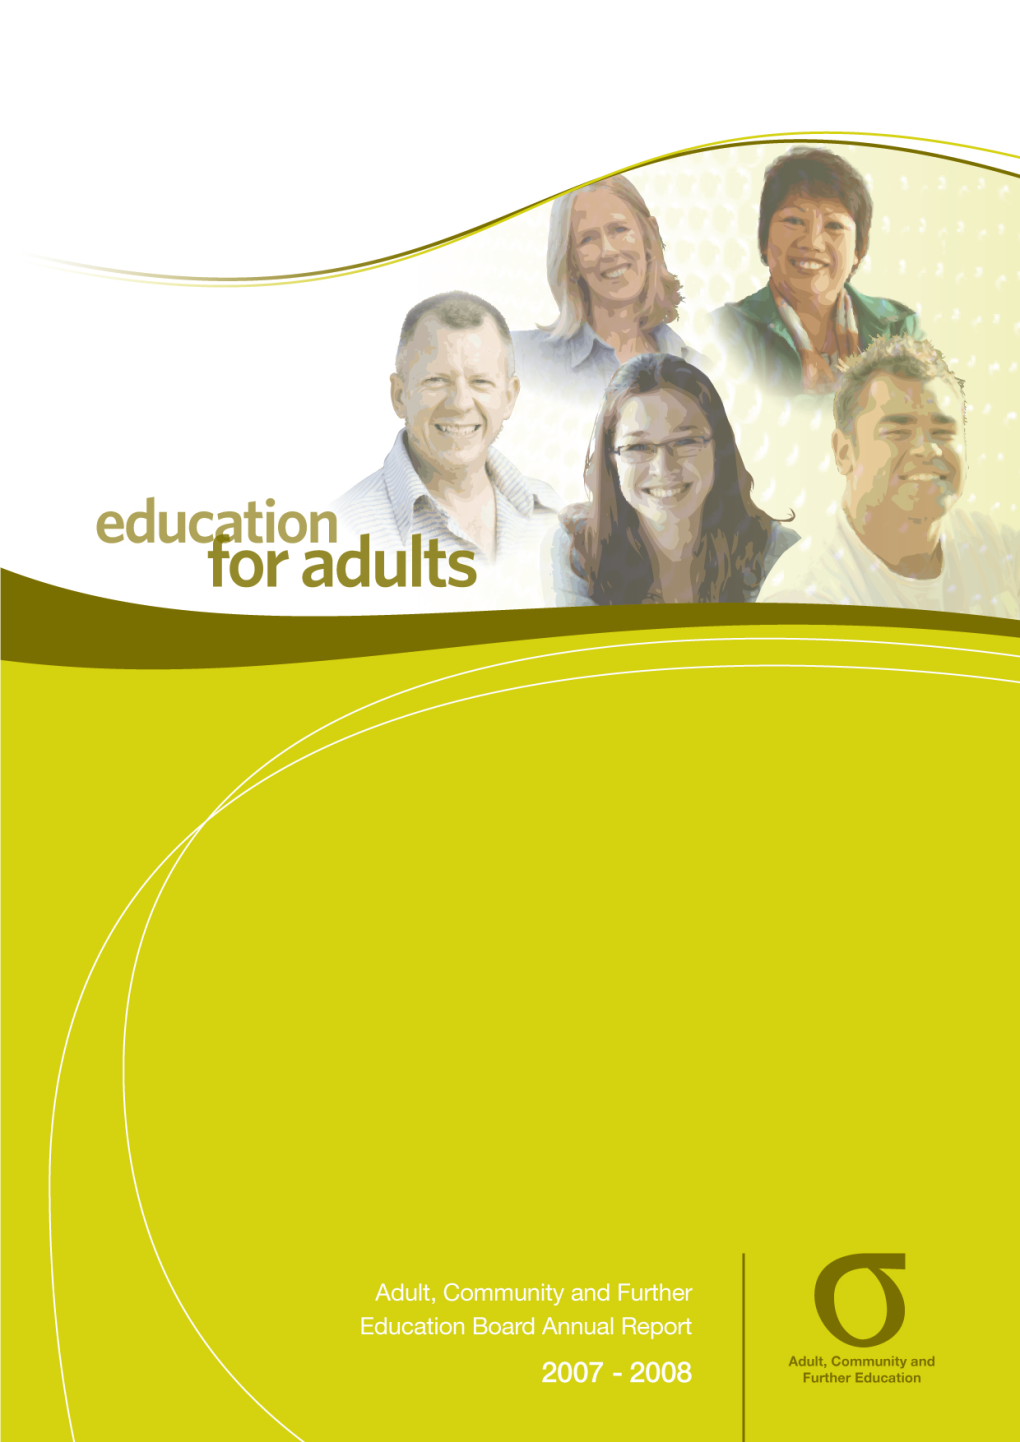 Adult, Community and Further Education Board